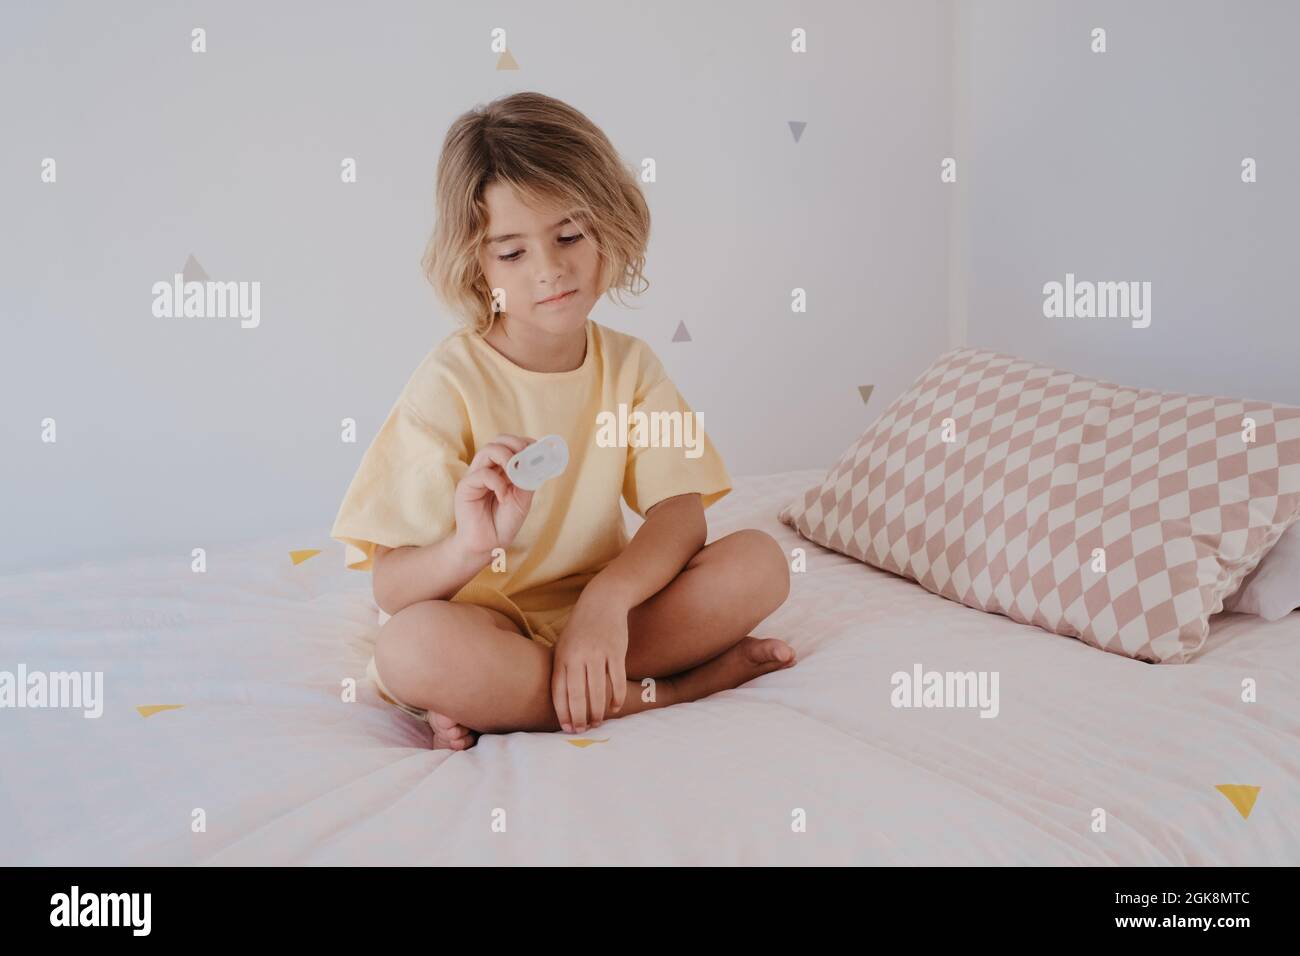 Barefoot child in t shirt with pacifier sitting with crossed legs on soft bed in house Stock Photo